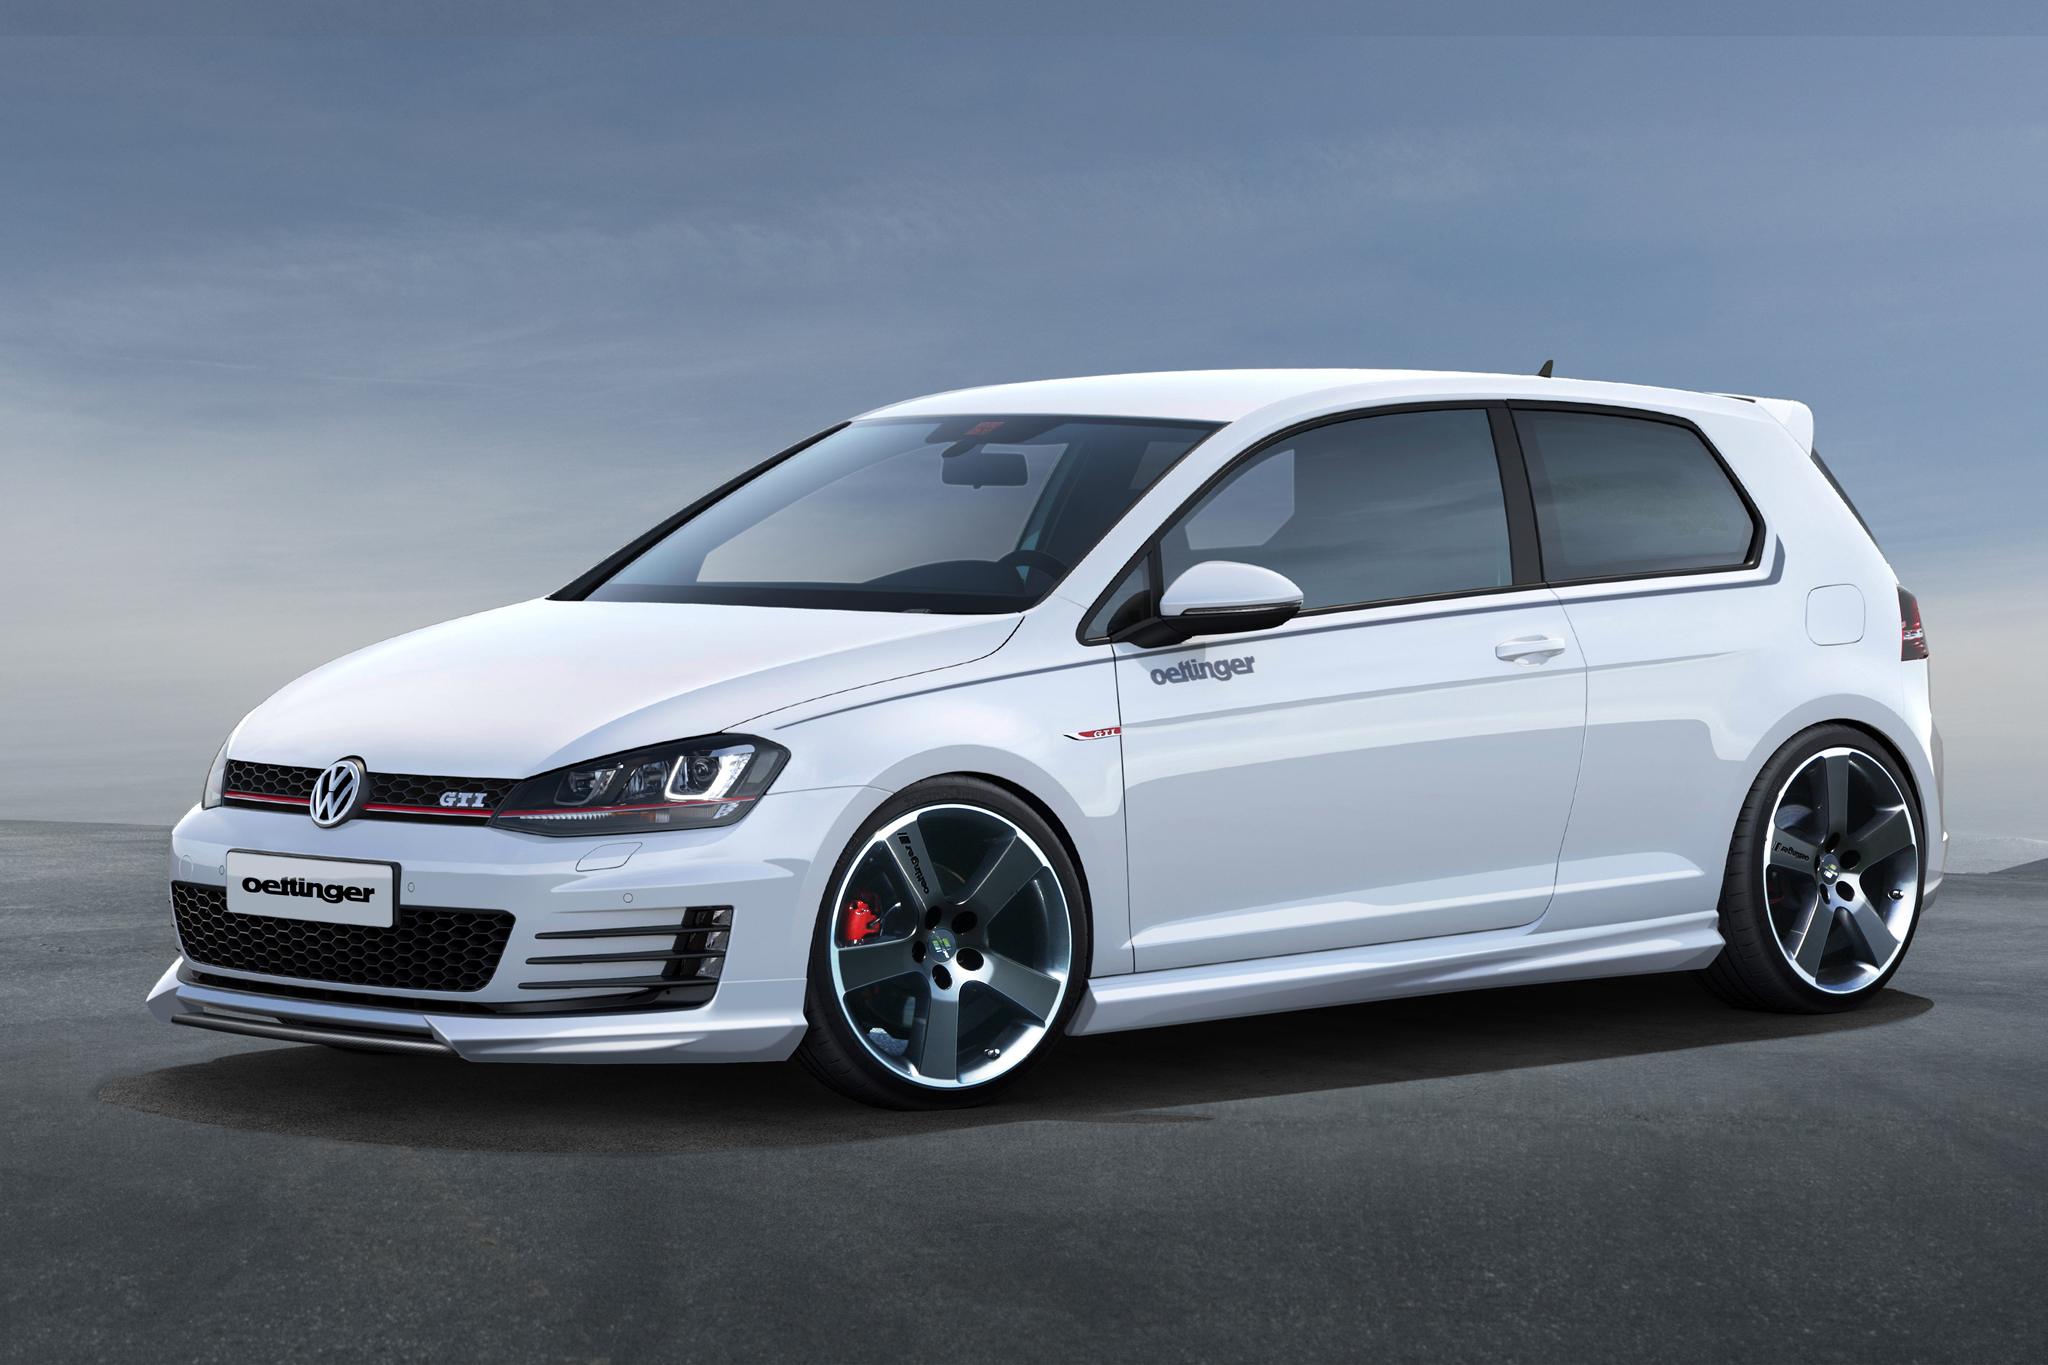 Volkswagen Golf GTI Mk7 Tuned by Oettinger   Eurotuner   View All Page 2048x1365